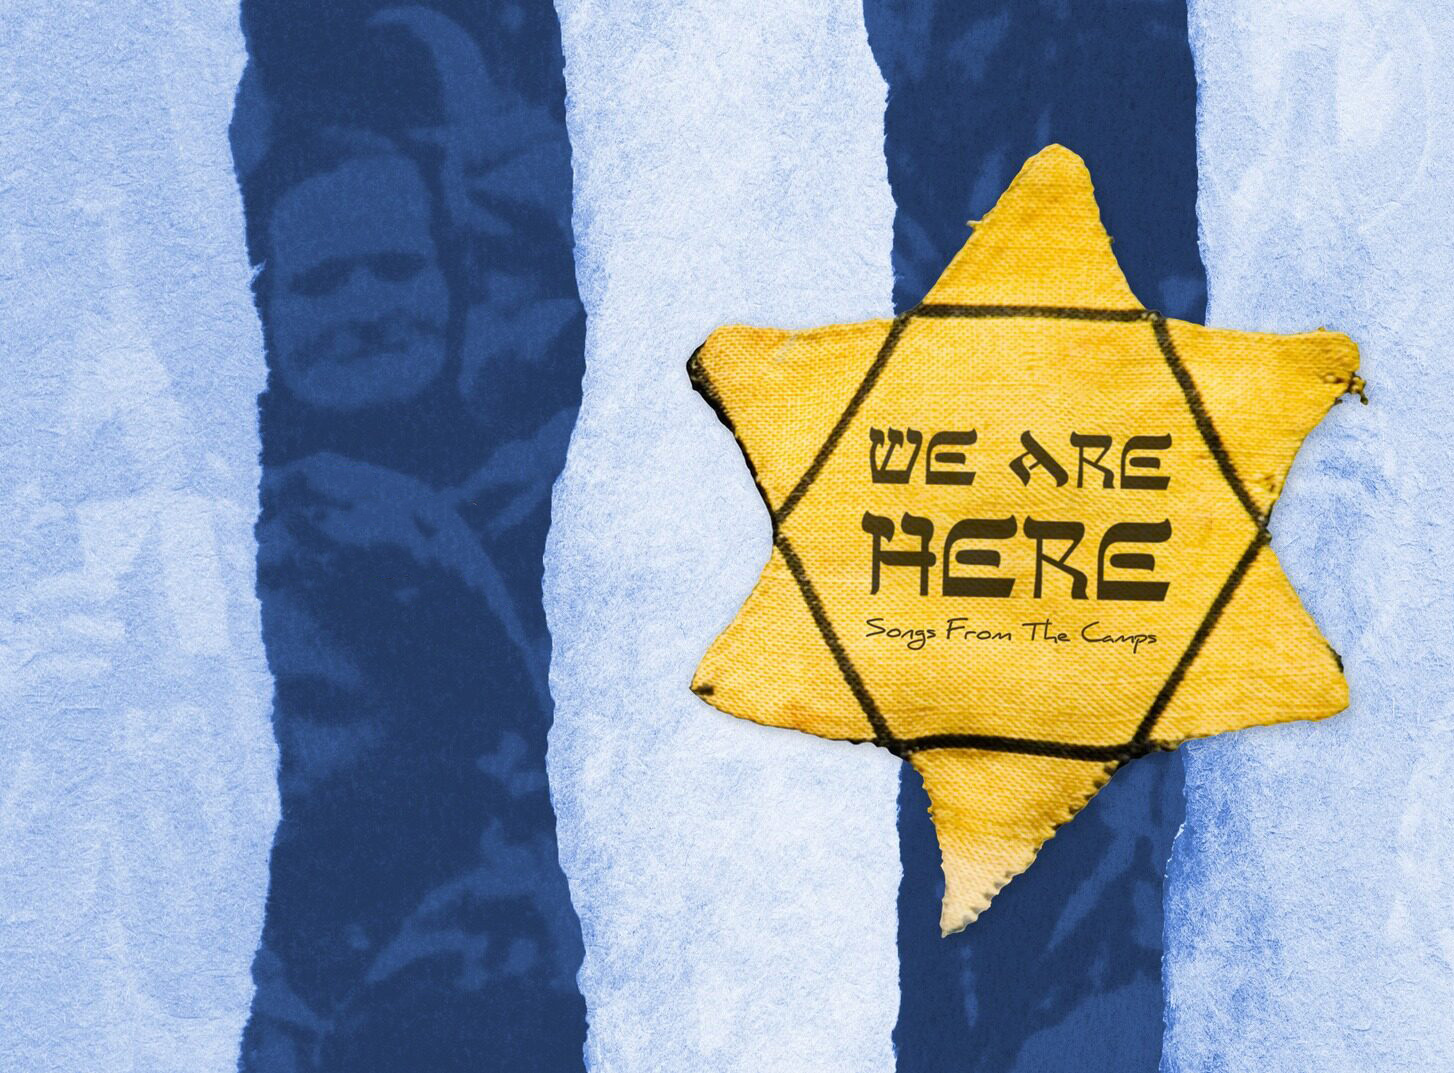 We Are Here: Songs From The Holocaust at Isaac Stern Auditorium